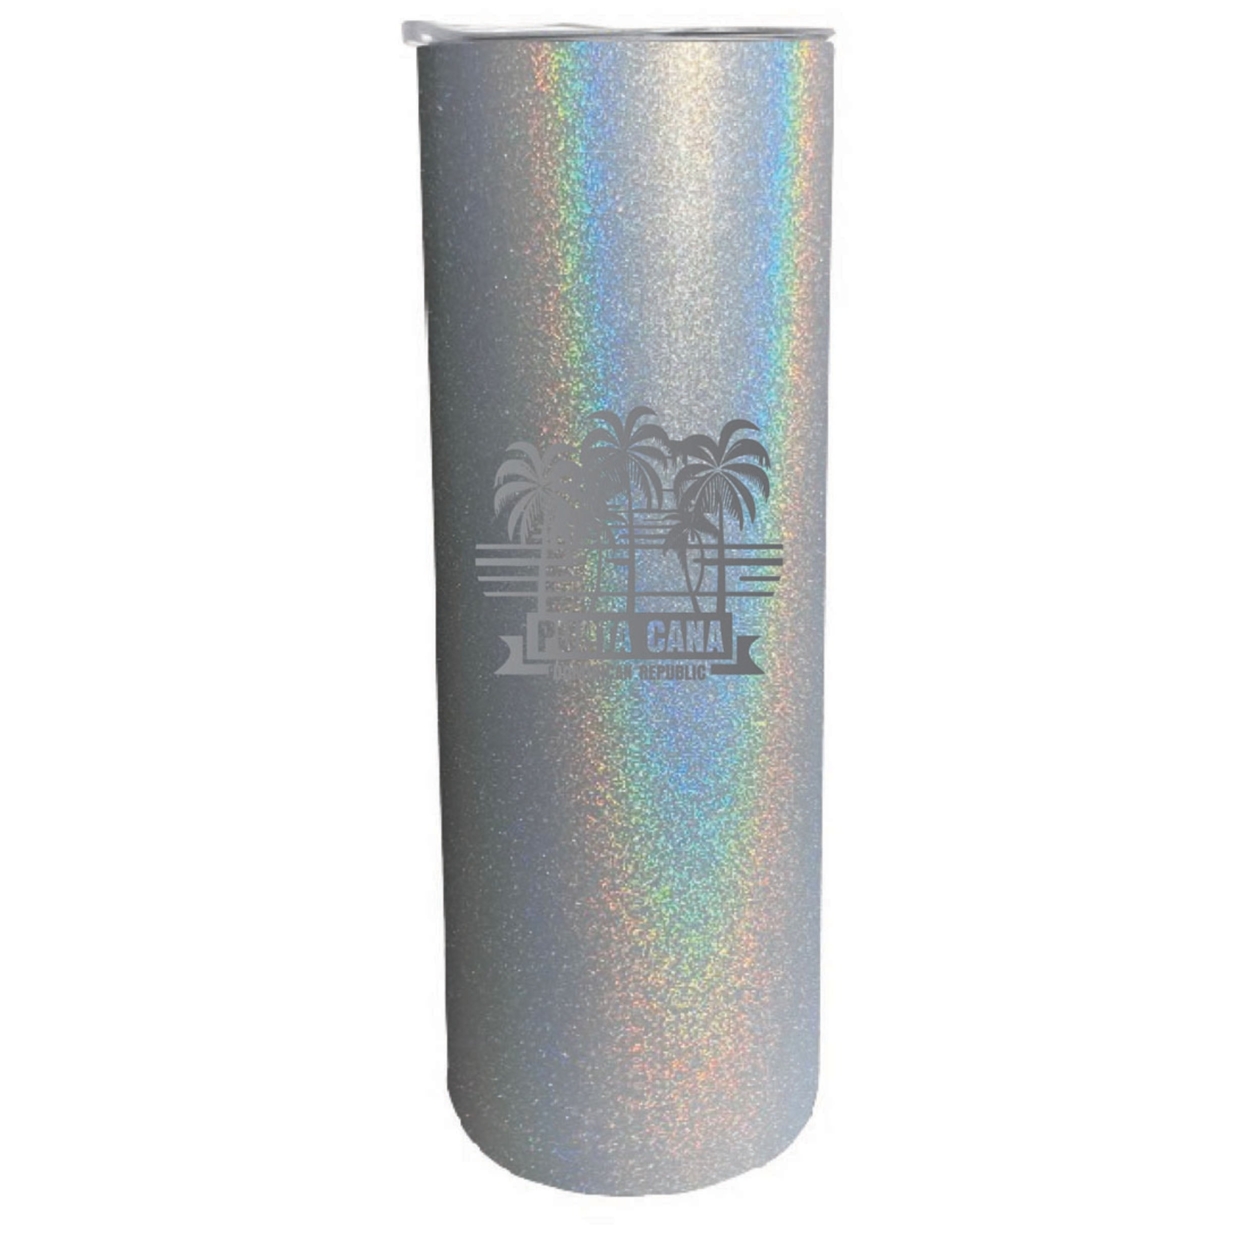 Punta Cana Dominican Republic Souvenir 20 Oz Insulated Stainless Steel Skinny Tumbler Etched - Rainbow Glitter Gray, PALM BEACH